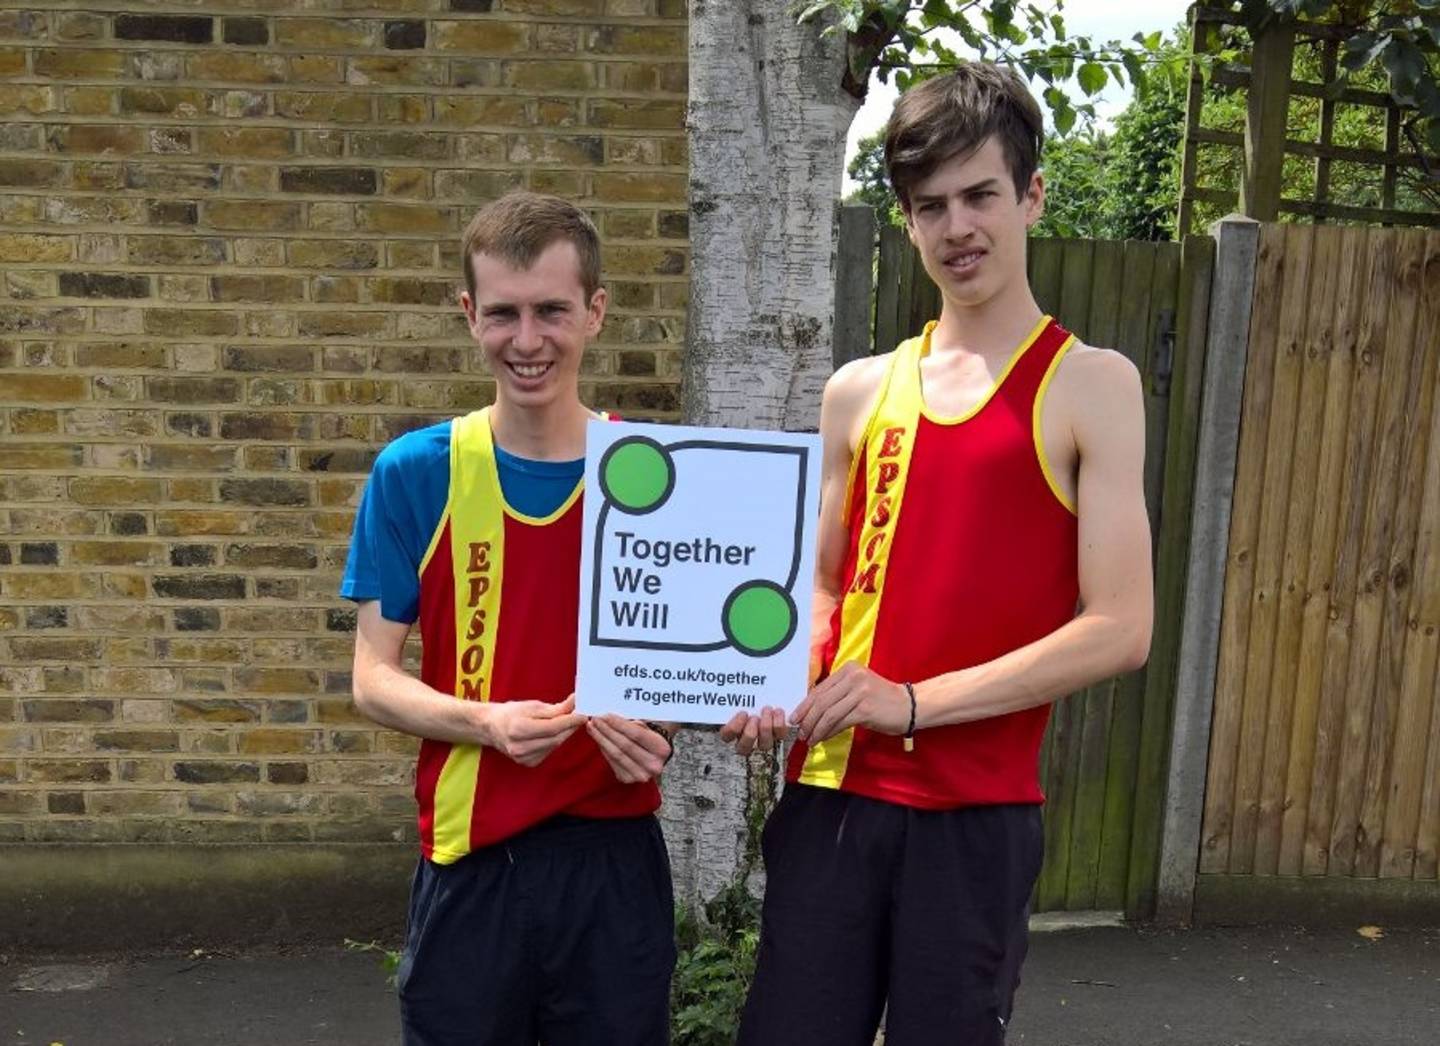 Image shows Daniel Wolff and team mate in their running kit smiling and holding a Together We Will campaign board.